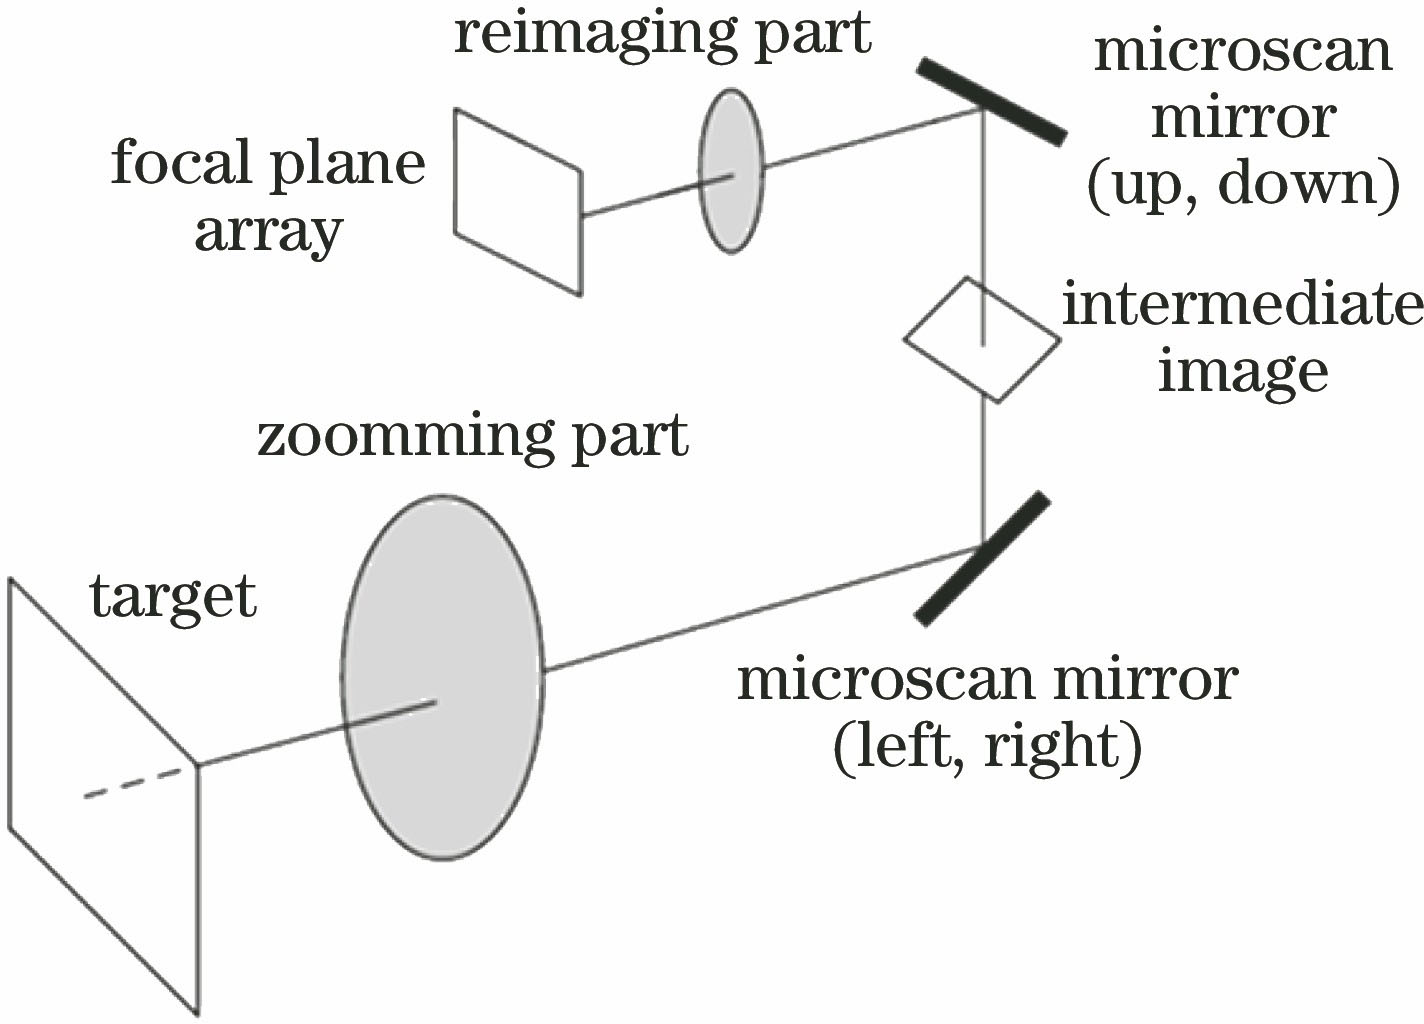 Schematic of micro-scanning realized by mirror-tilting